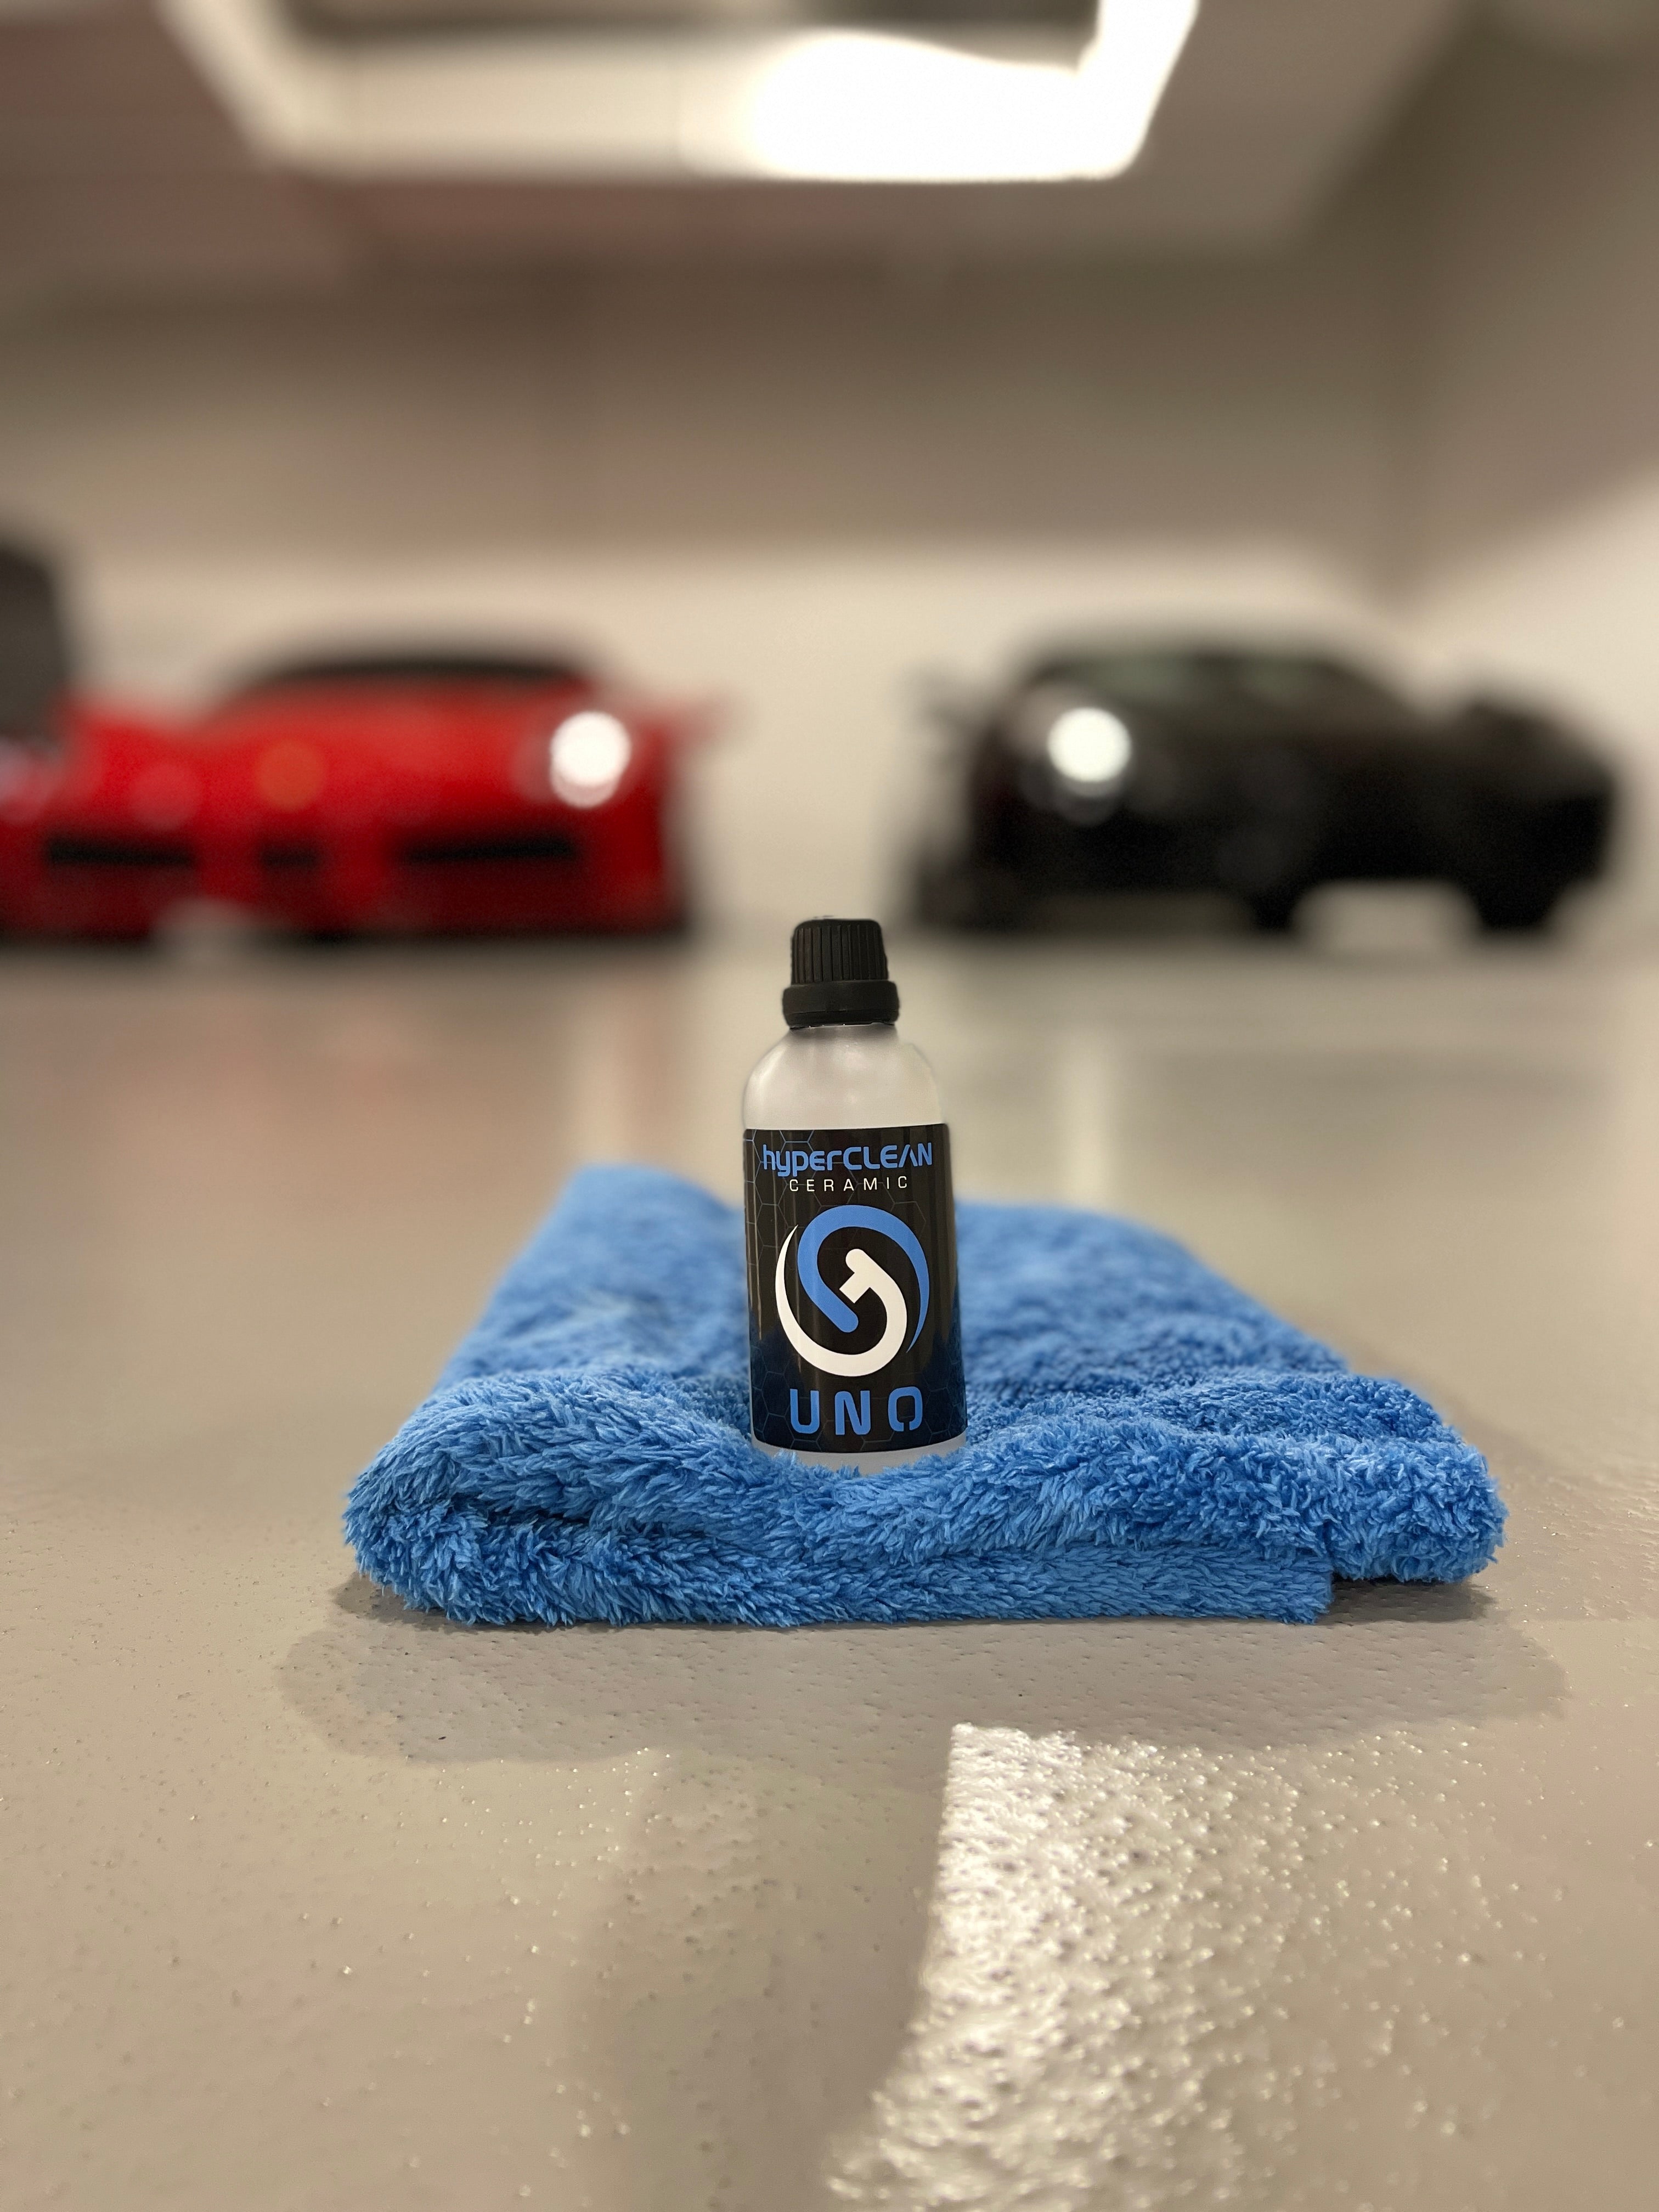 New ceramic coating makes paint protection more DIY friendly - Gtechniq USA